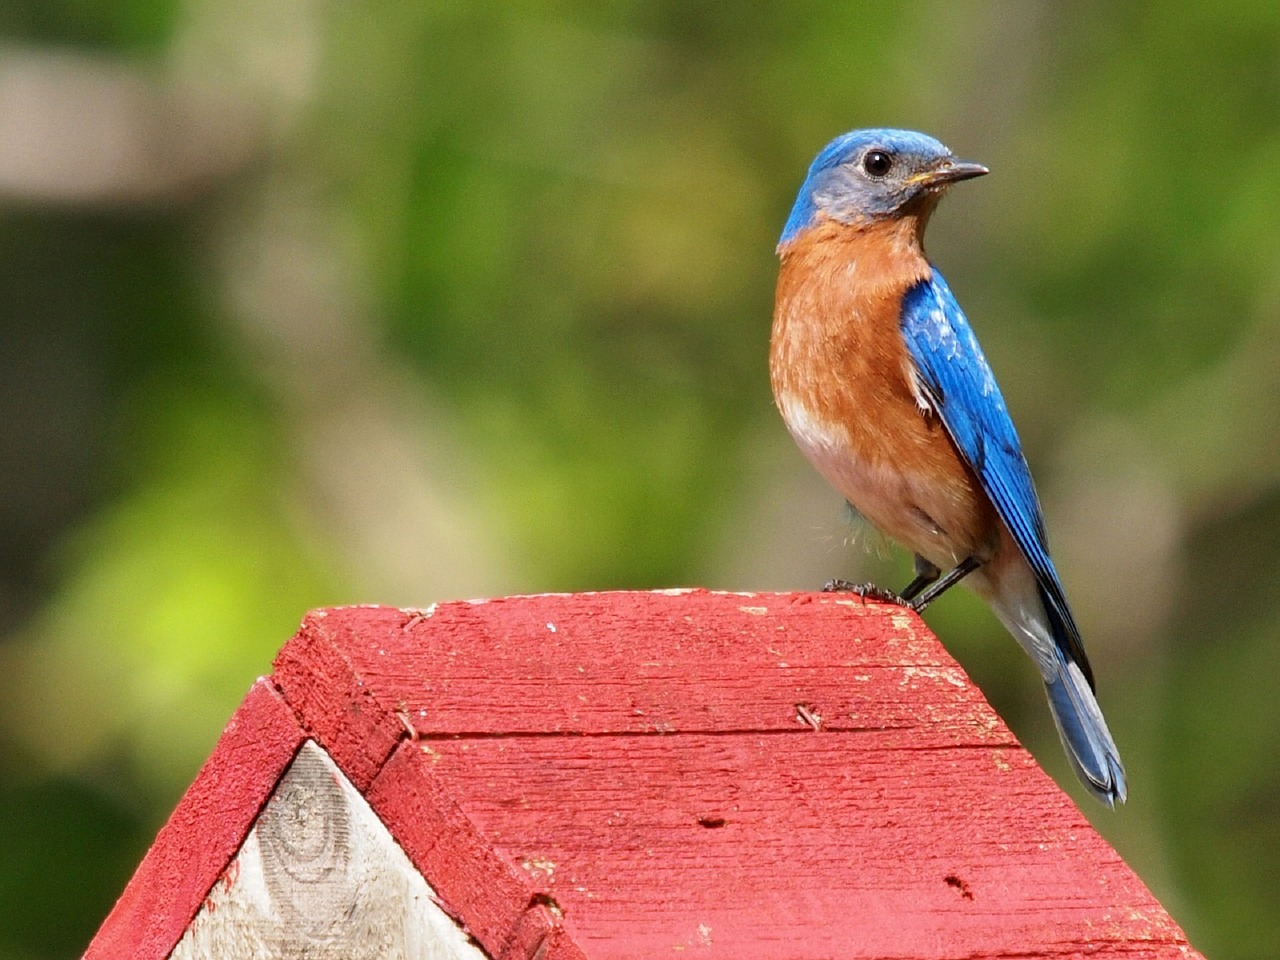 Image shows a male Eastern Bluebird perching on the roof of a red birdhouse, with a green blurry background. Photo is public domain.